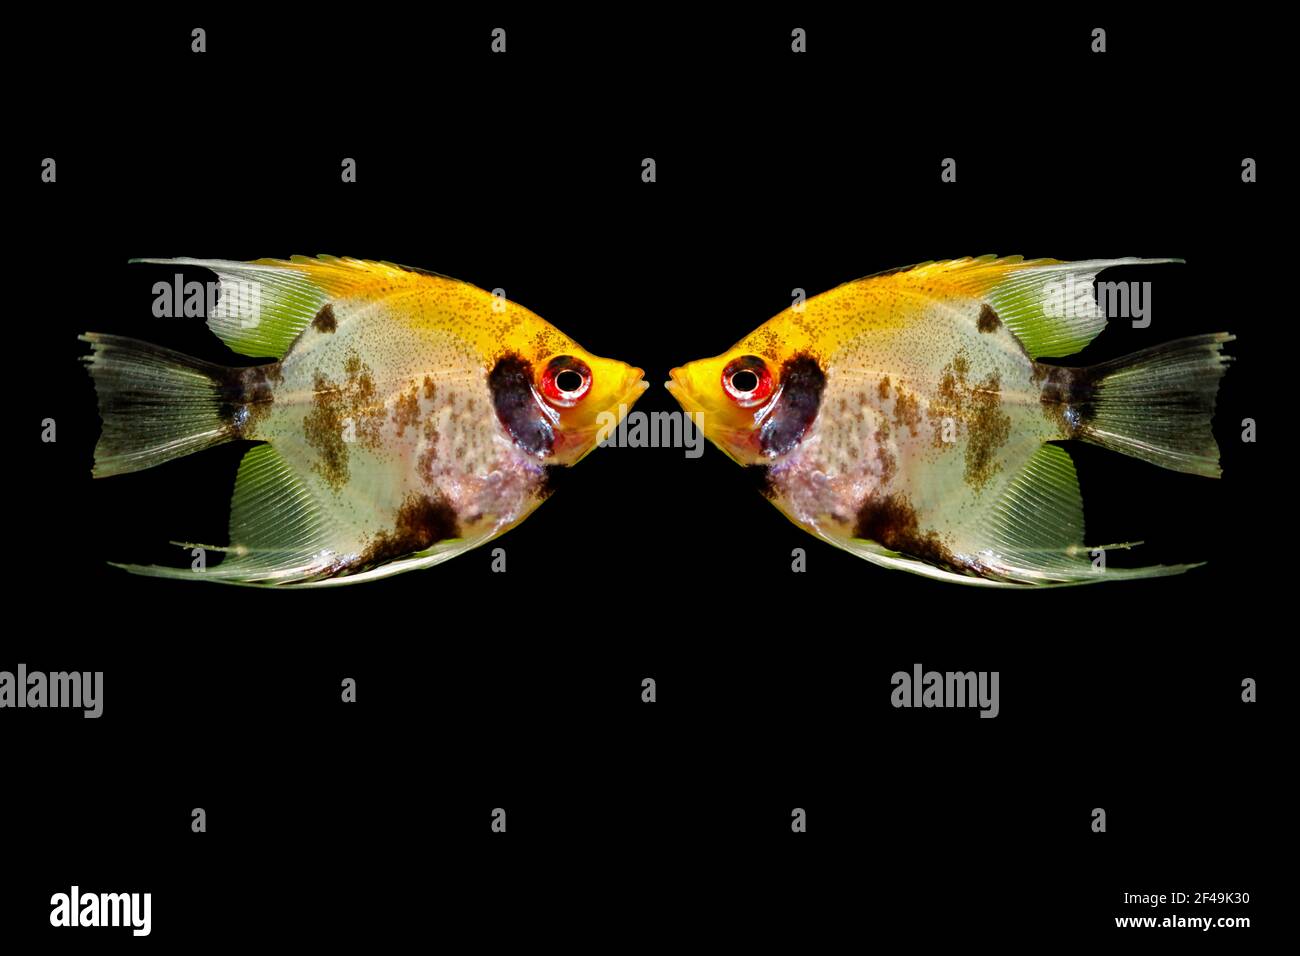 Angelfish (Pterophyllum scalare), also known as the freshwater angelfish, isolated in black background. Composite picture of two fish. Stock Photo